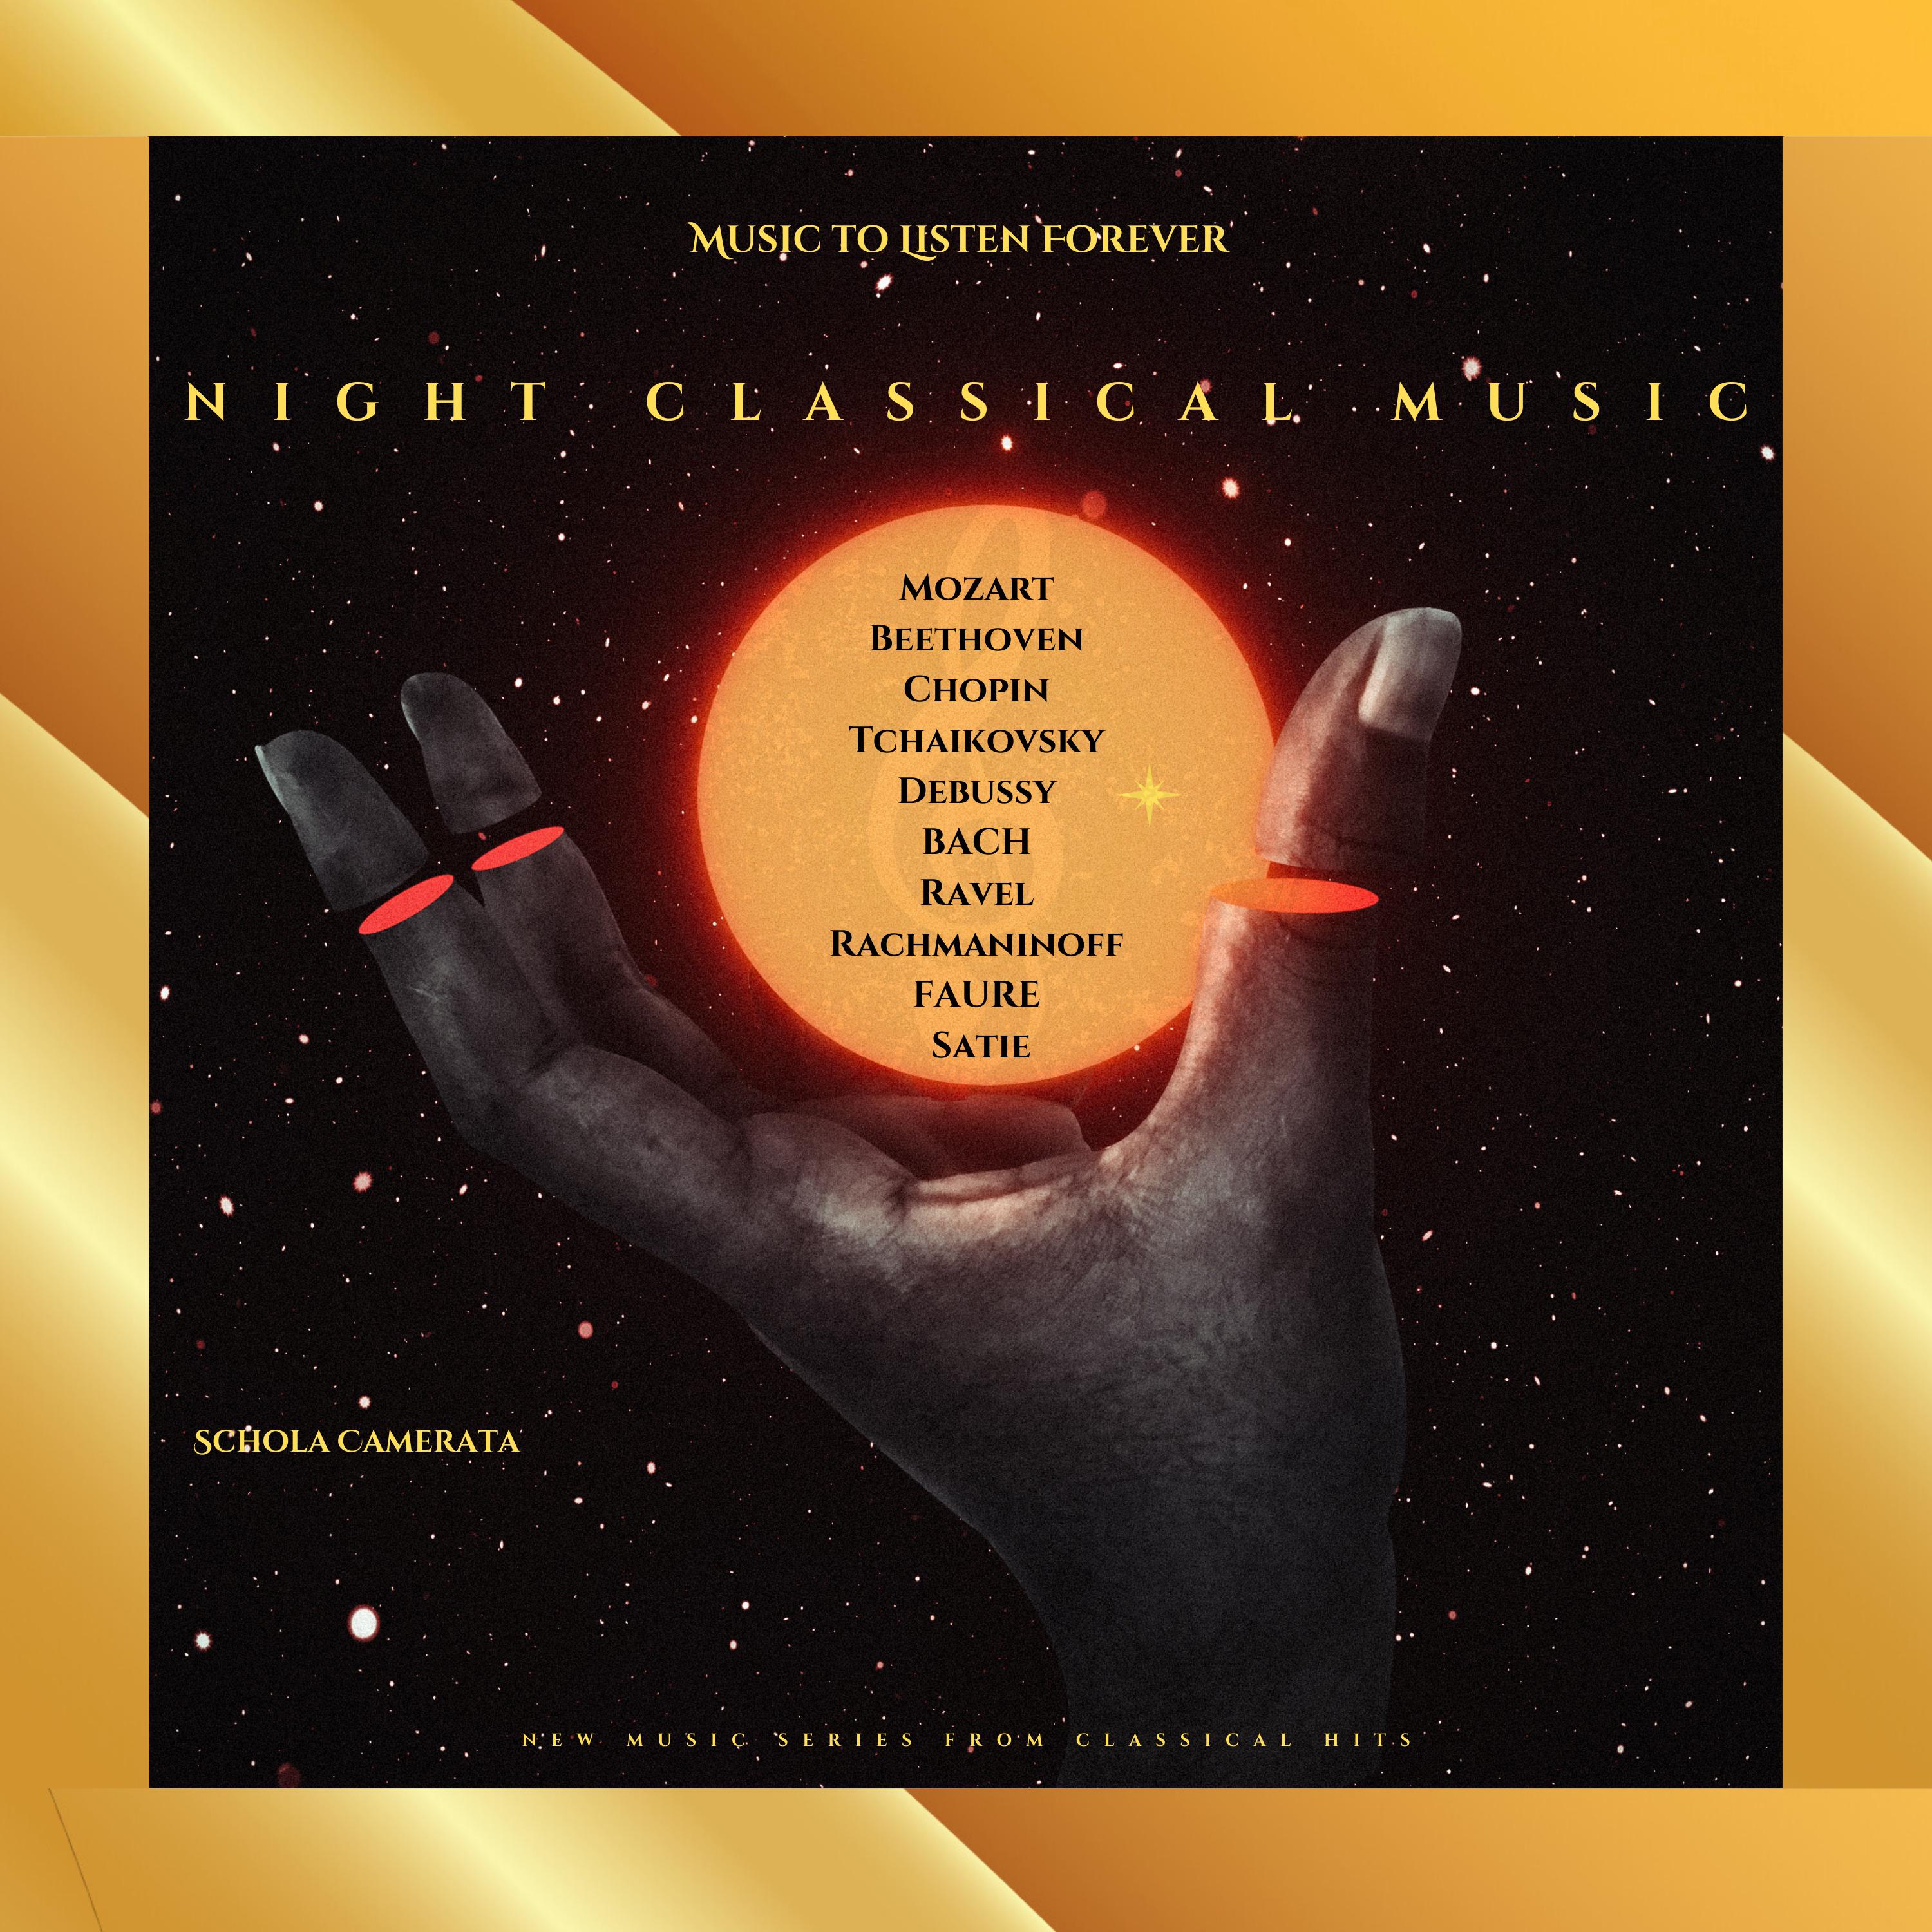 Постер альбома Night Classical Music - Schola Camerata -  Mozart - Beethoven - Chopin - Tchaikovsky - Debussy - Bach - Ravel -  Rachmaninoff - Fauré - Satie - New Music Series Fron Classical Hits